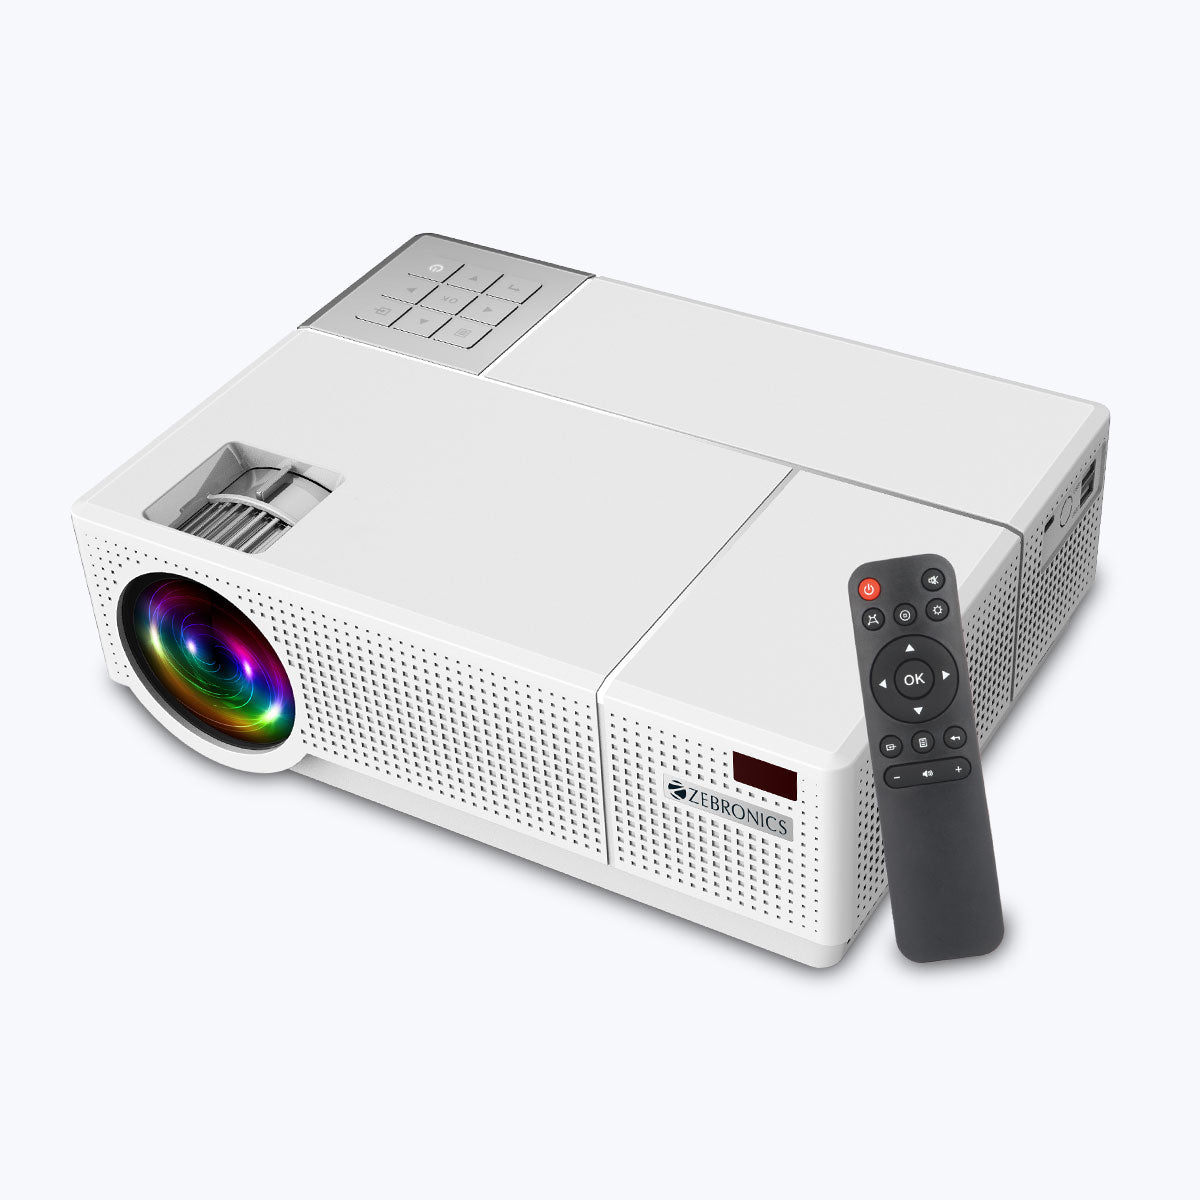 Yaber Y31 TFT LCD Projector Specs